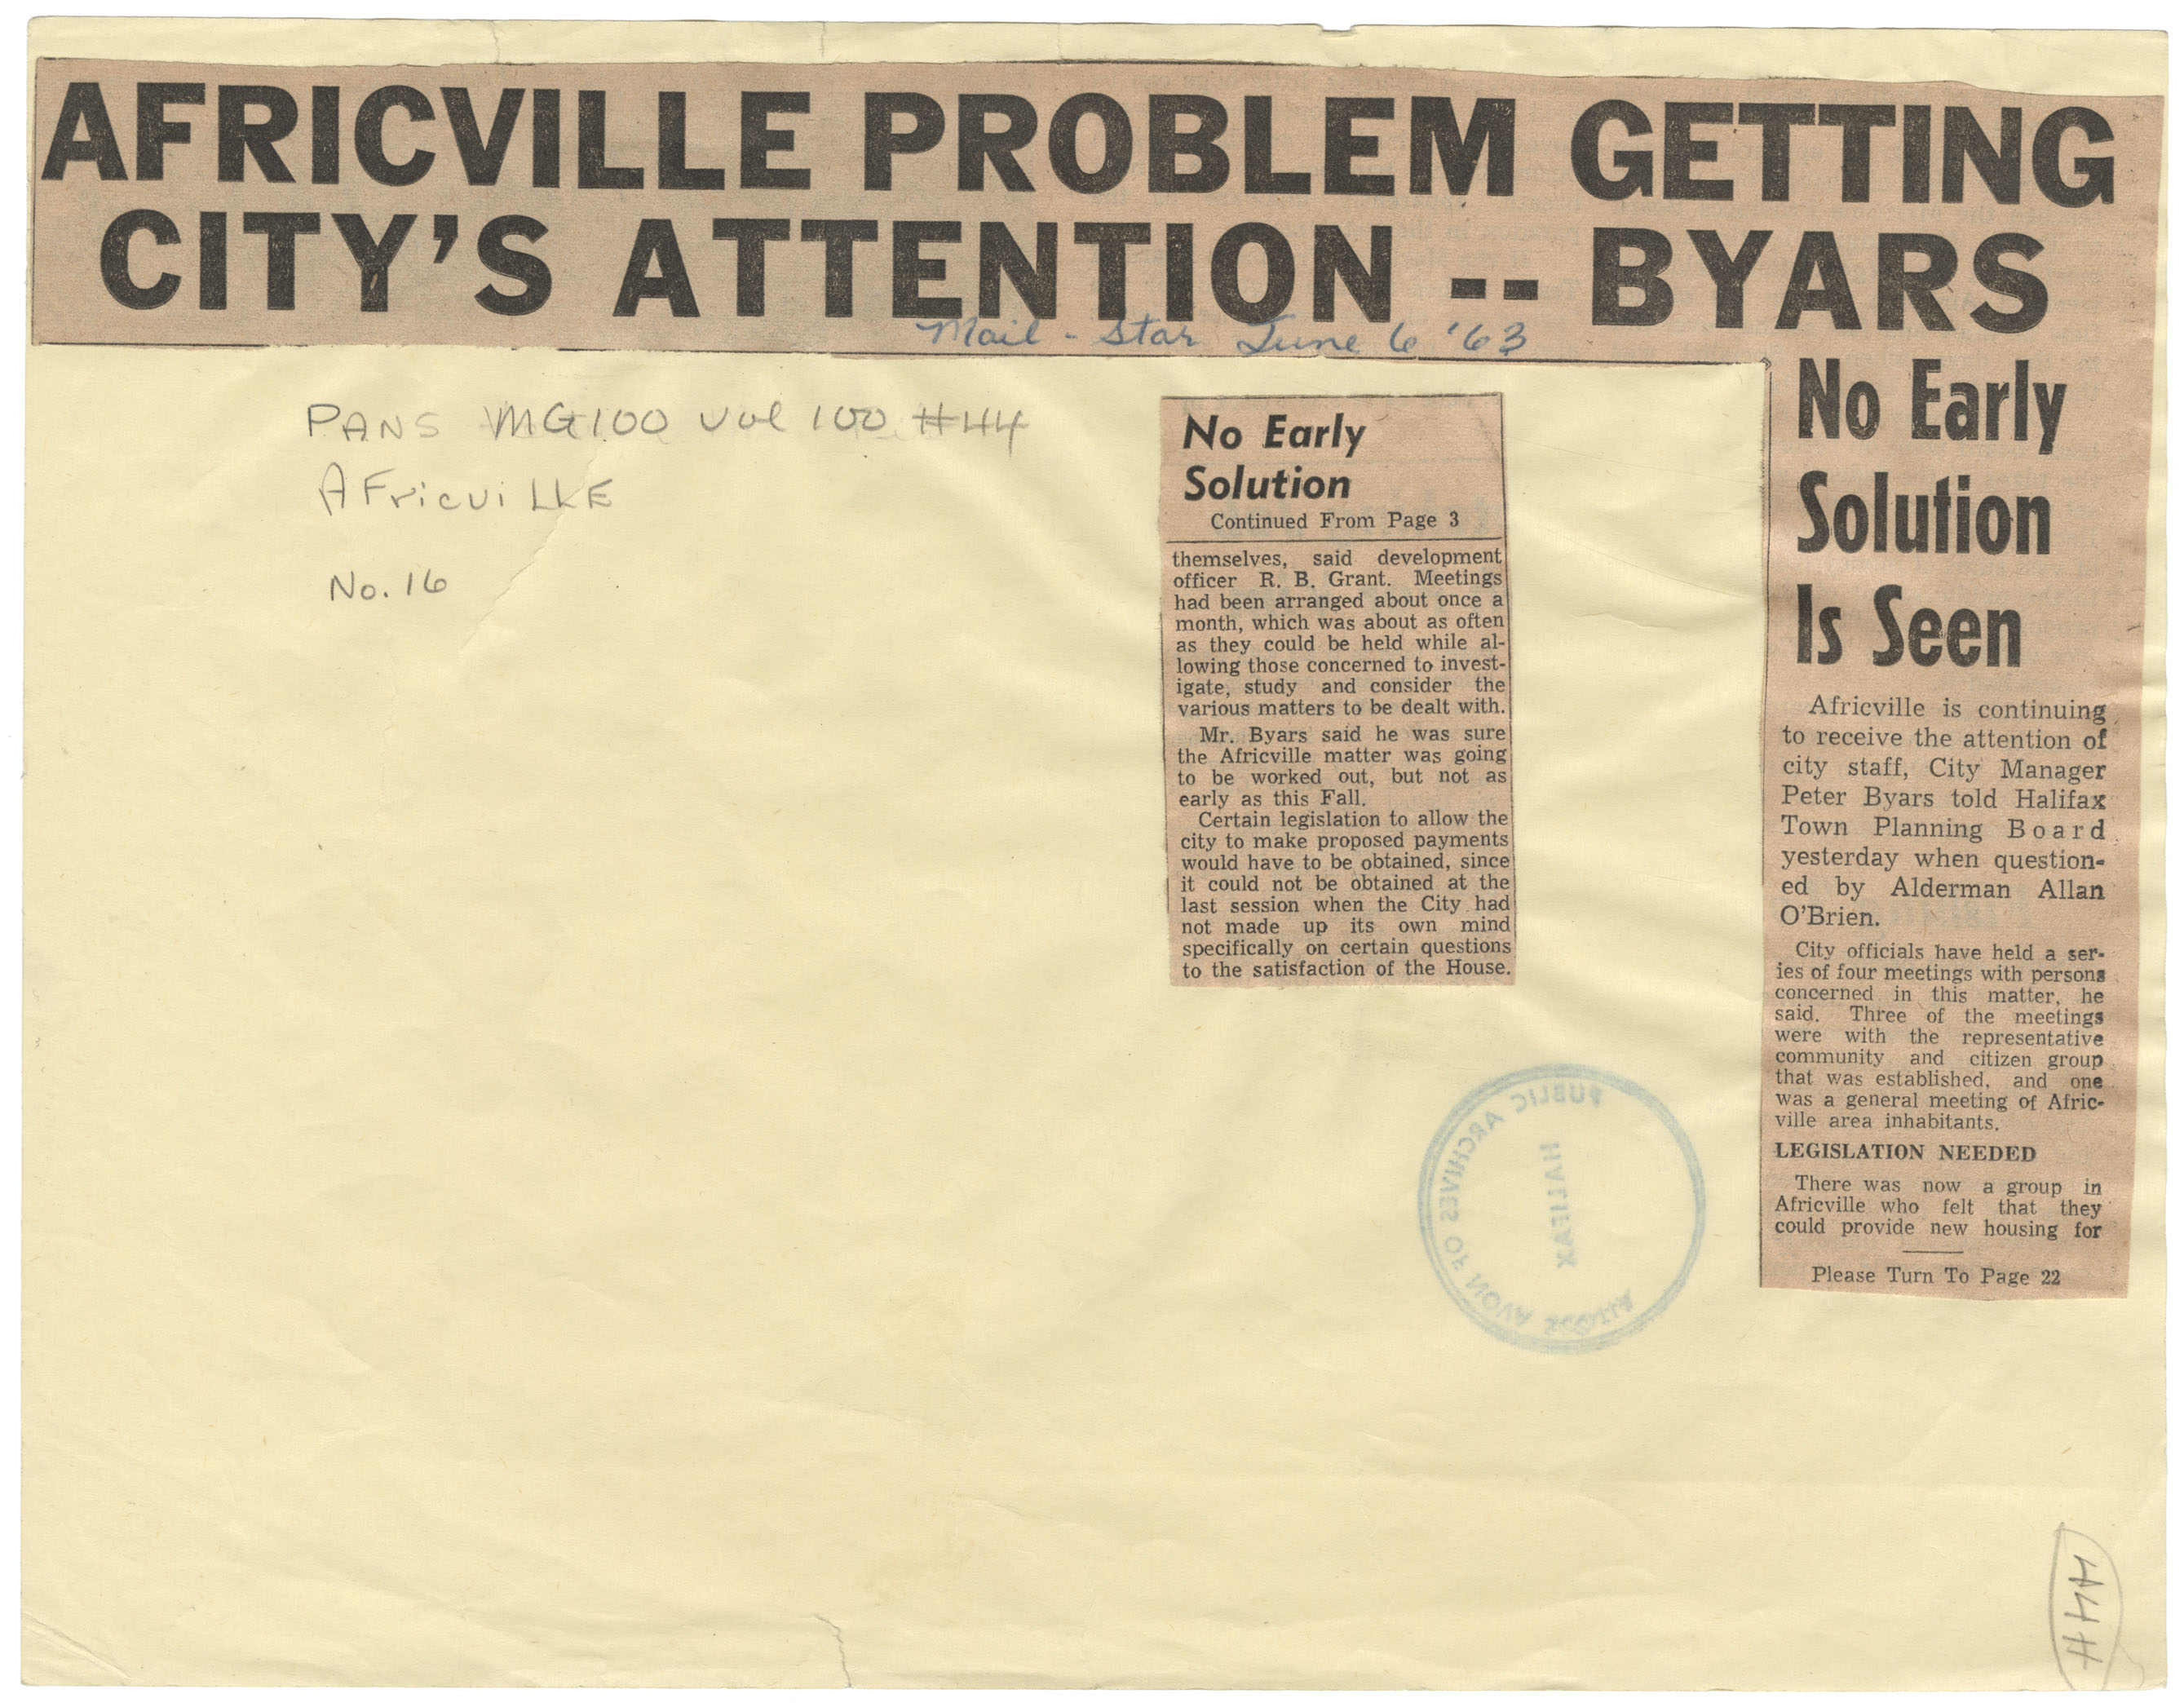 african-heritage : Africville Problem Getting Citys Attention - Byars, Mail Star excerpt